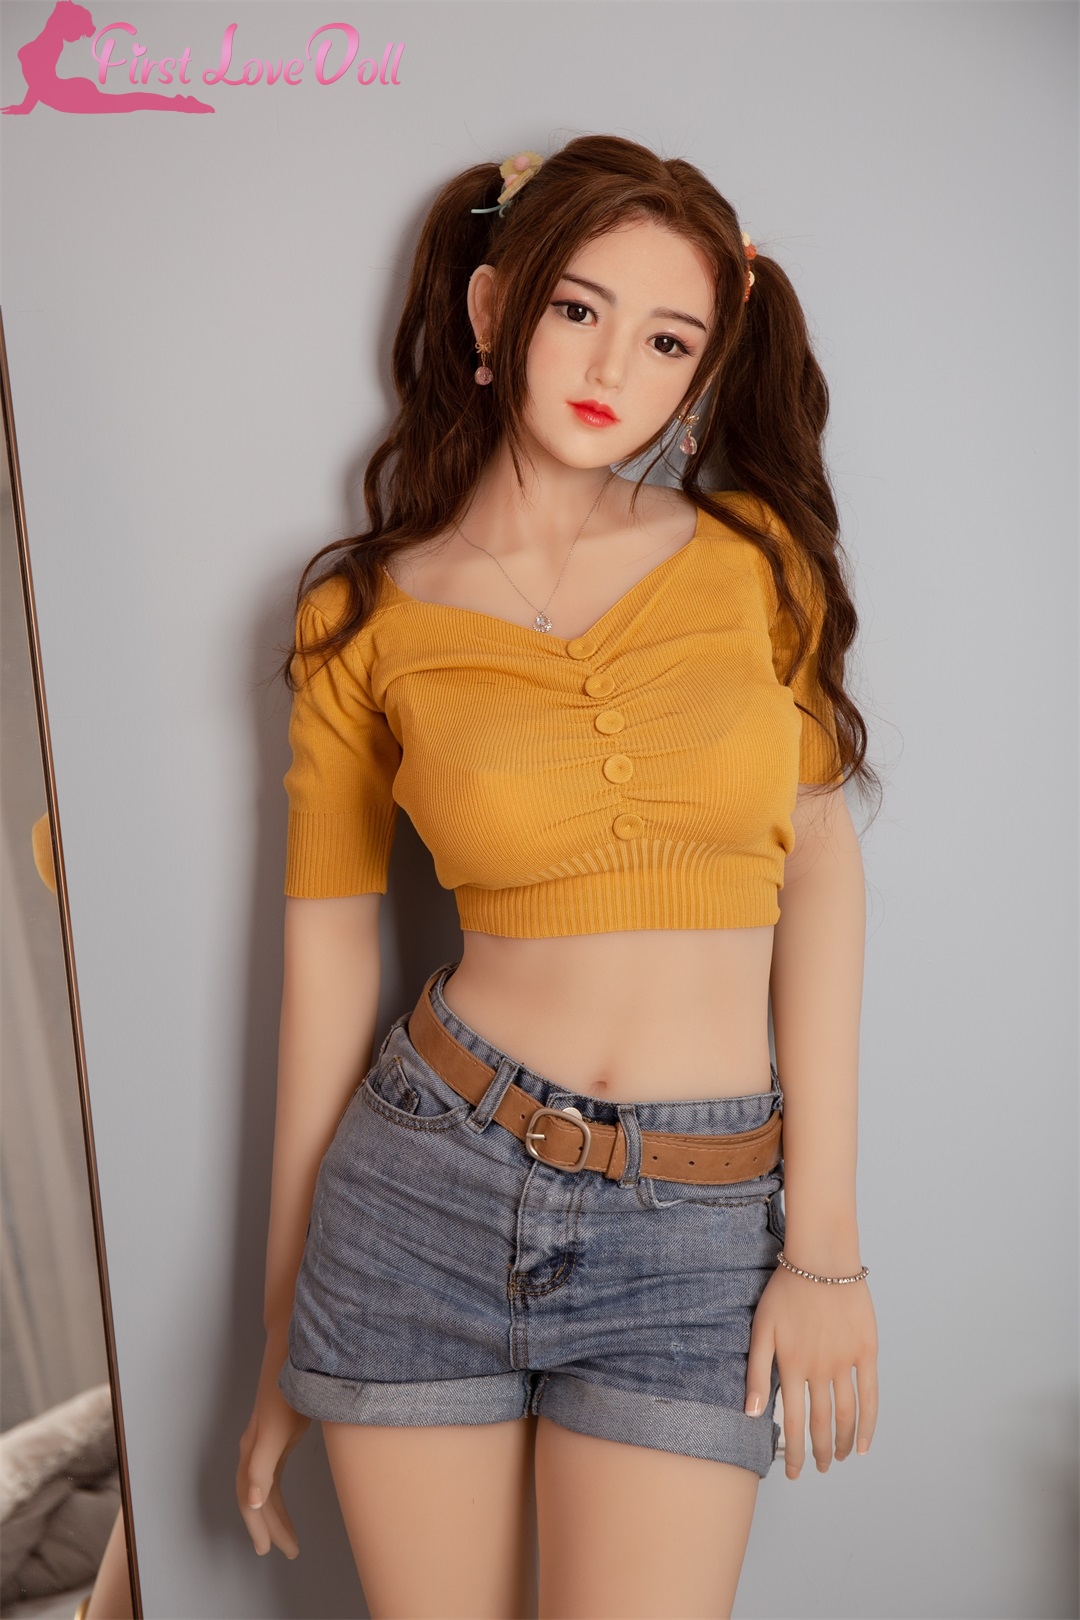 JX Doll | Nana- 4ft 11/150cm Japanese Style Ultra Realistic Silicone Sex Doll With Curly Hair-First Love Doll